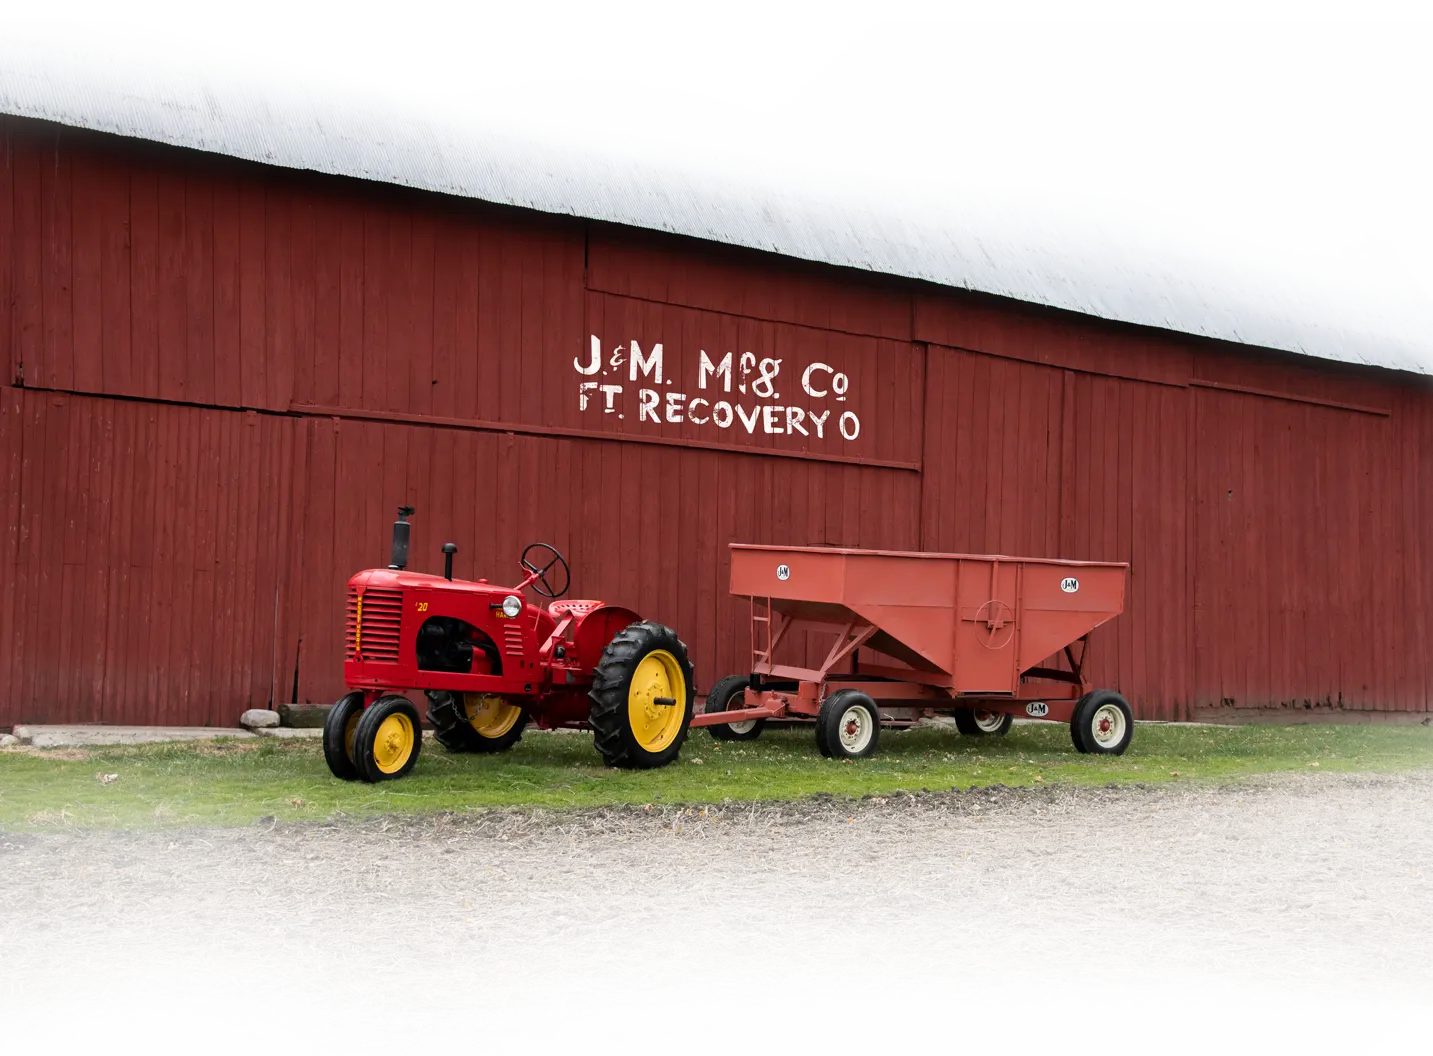 1961 Gravity Wagon in front of barn